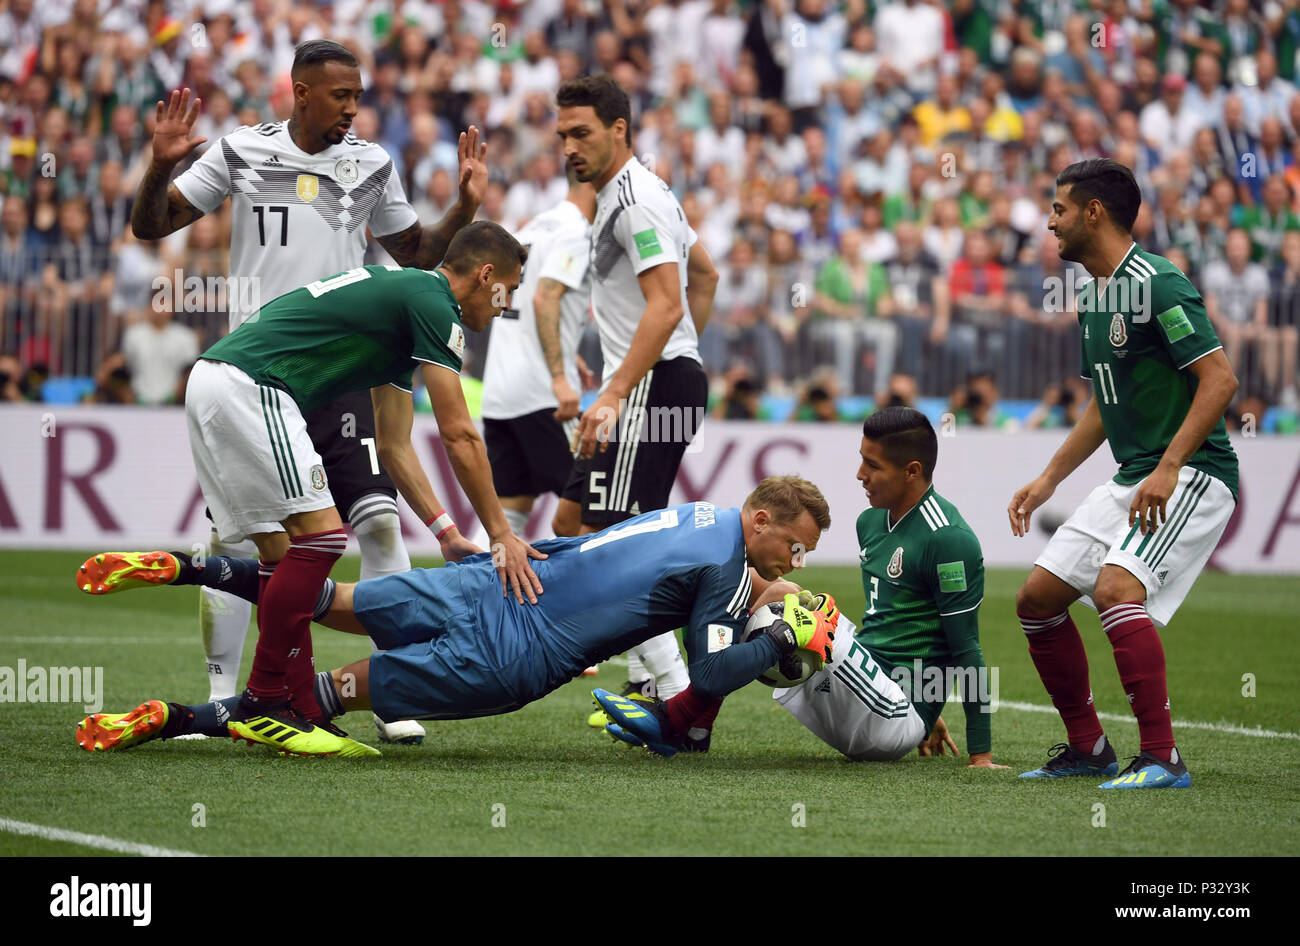 Moscow, Russia, 17 June 2018, , Soccer, FIFA World Cup, Group F, Matchday 1 of 3, Germany vs Mexico at the Luzhniki Stadium: Germany's goalkeeper Manuel Neuer (C) holds the ball in front of Hugo Ayala Castro (2-R) of Mexico, Carlos Vela (R) of Mexico and Jerome Boateng (top L) of Germany, Mats Hummels (C top) of Germany. Photo: Federico Gambarini/dpa Credit: dpa picture alliance/Alamy Live News Credit: dpa picture alliance/Alamy Live News Stock Photo